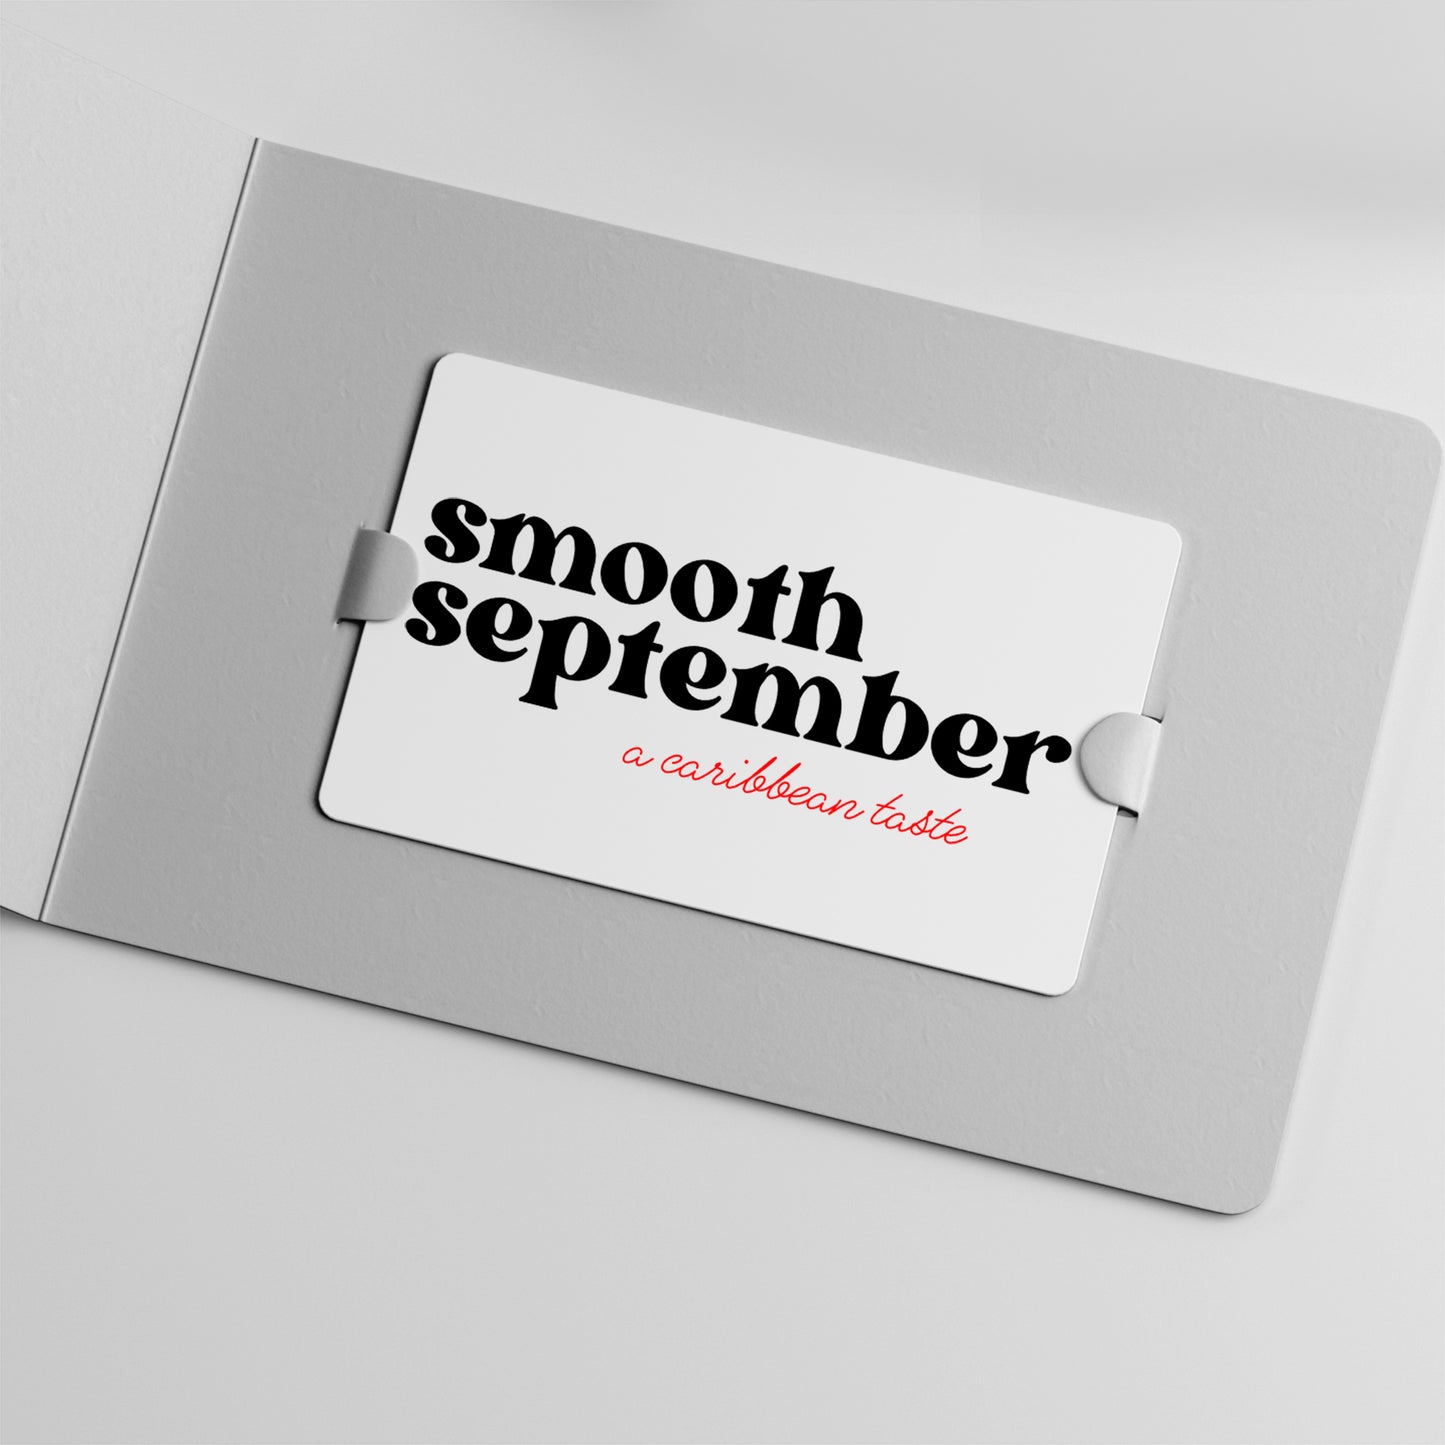 Smooth September Digital Gift Card
Shopping for someone else but not sure what to give them? Give them the gift of choice with a gift card. Choose and explore tea gift ideas to the fullest with an SmSmooth September, LLCGift Cardgift card